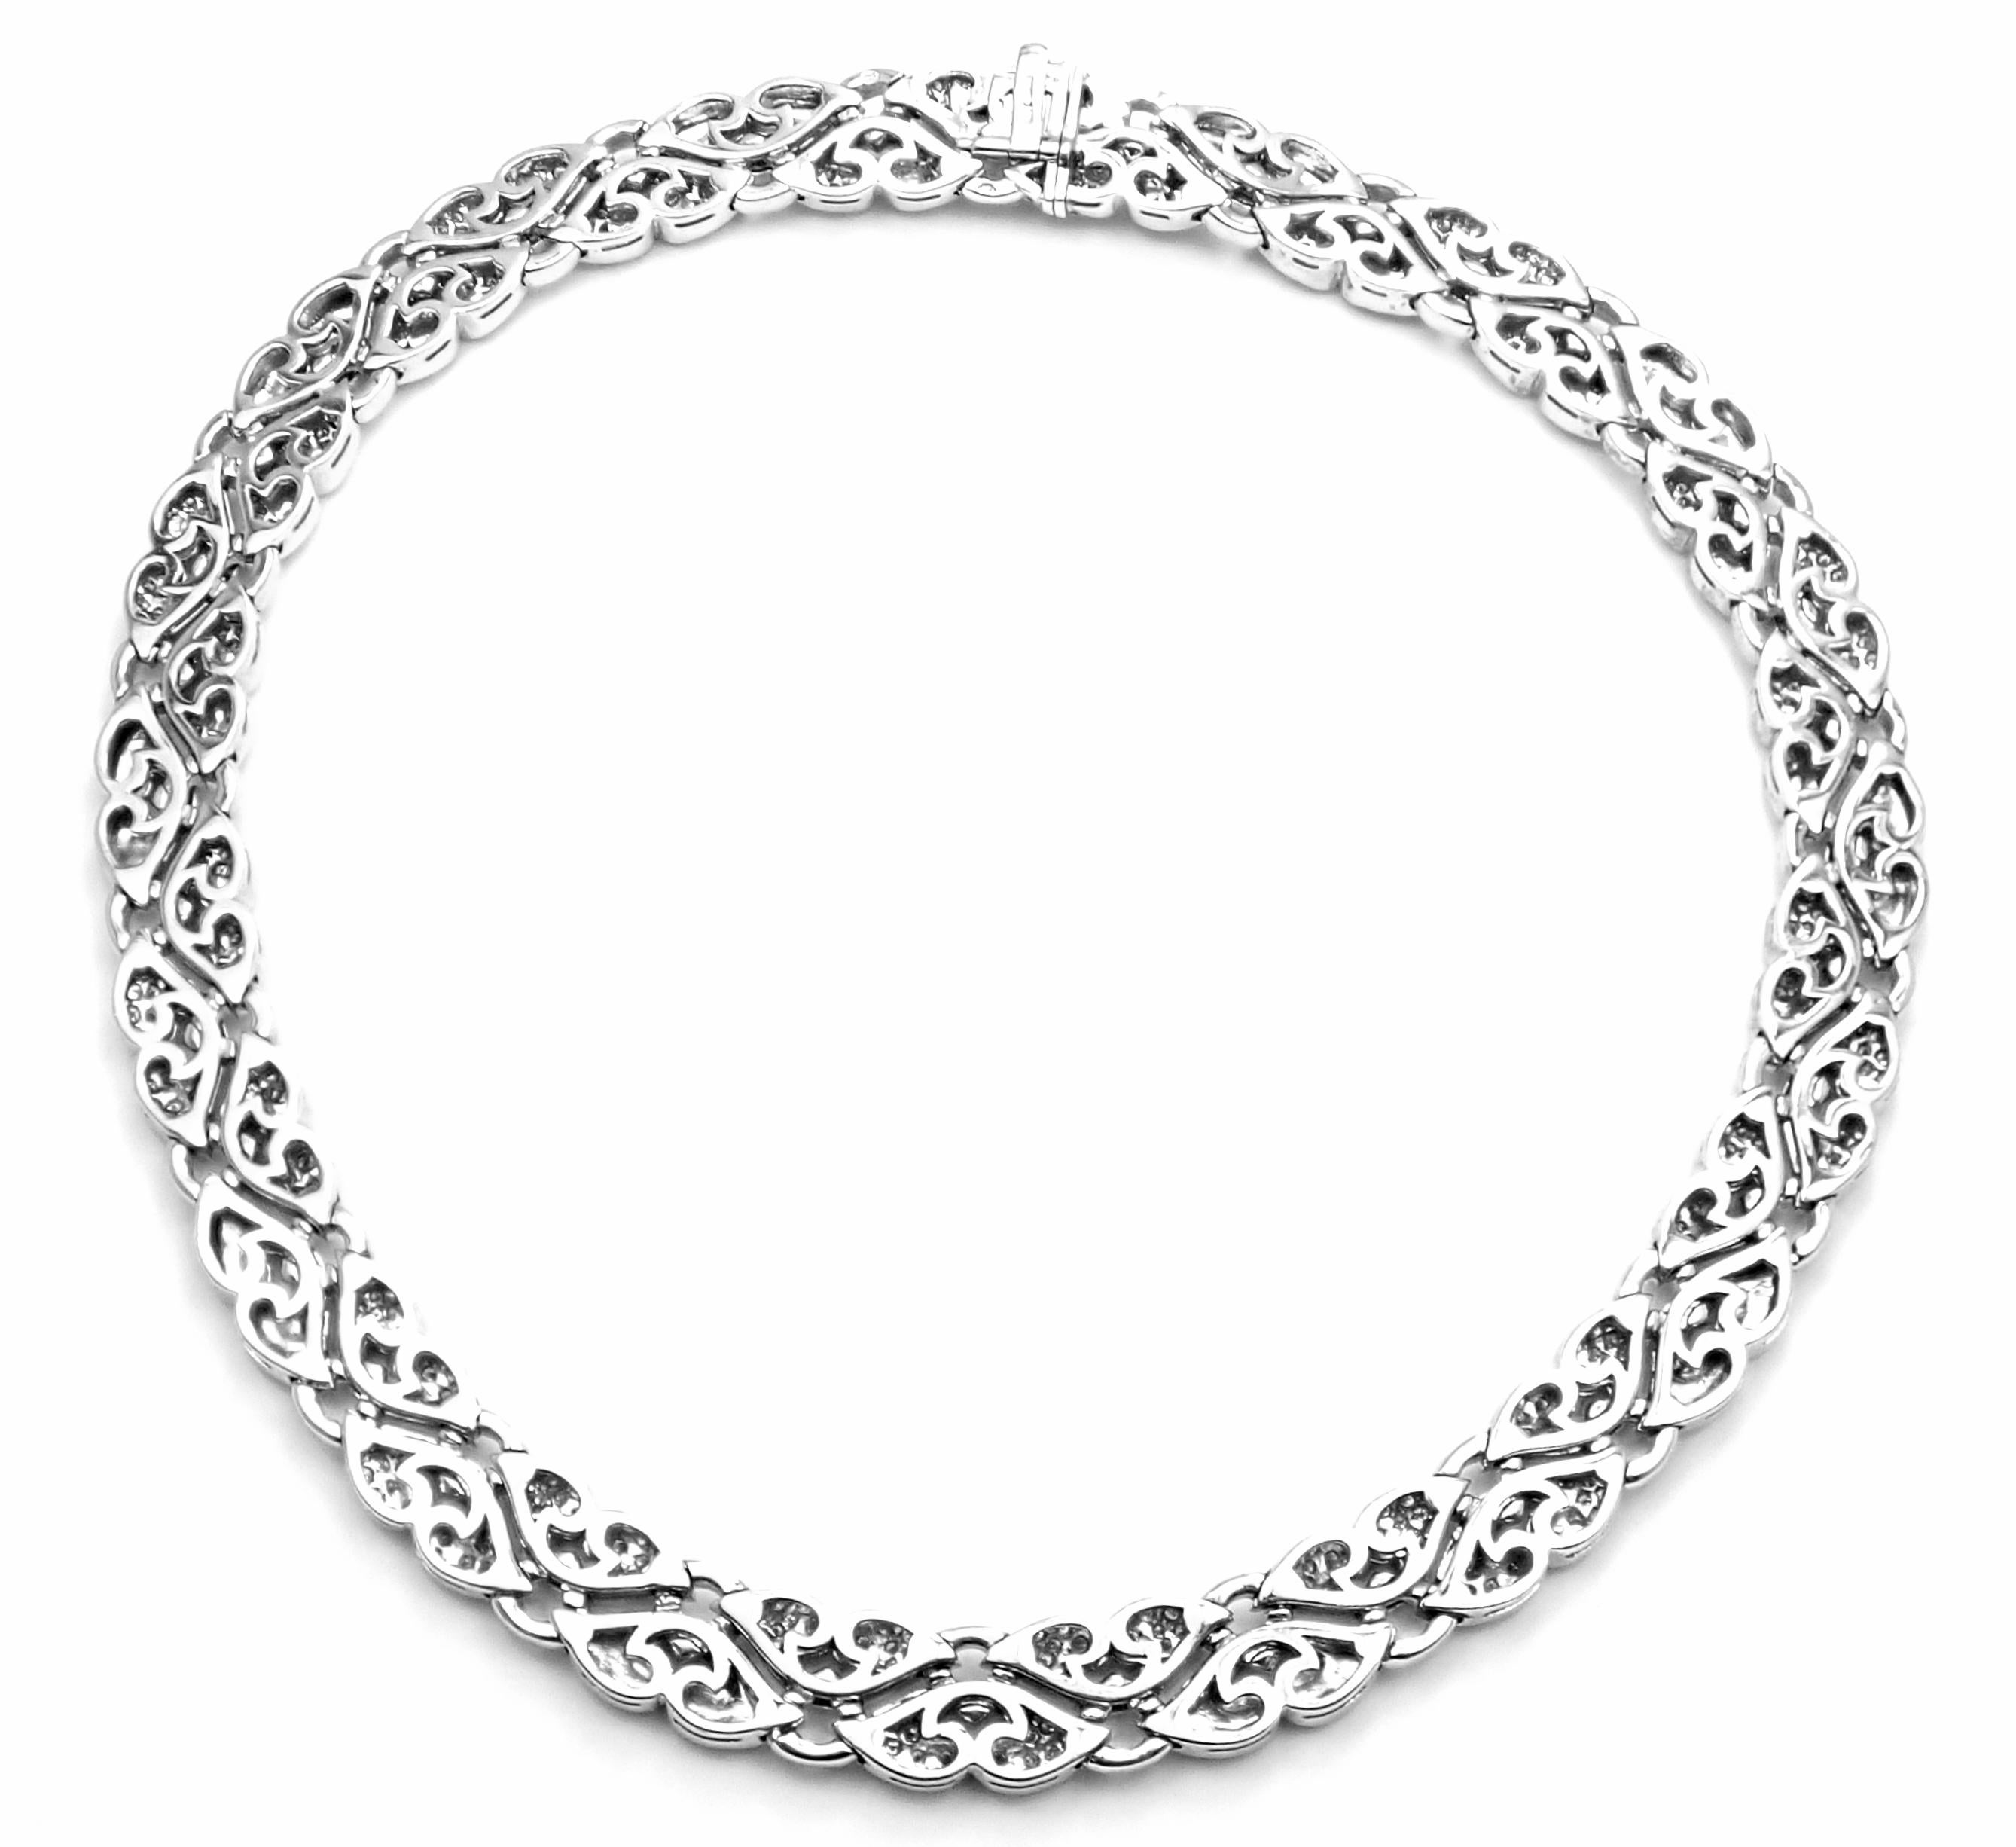 Platinum Nuvole 12ct Diamond Chocker Necklace by Bulgari. 
With 810 round brilliant cut diamonds VVS1 clarity, E color total weight approx. 12ct
Details:
Chain Length: 16'' 
Width: 13mm
Pendant: 2